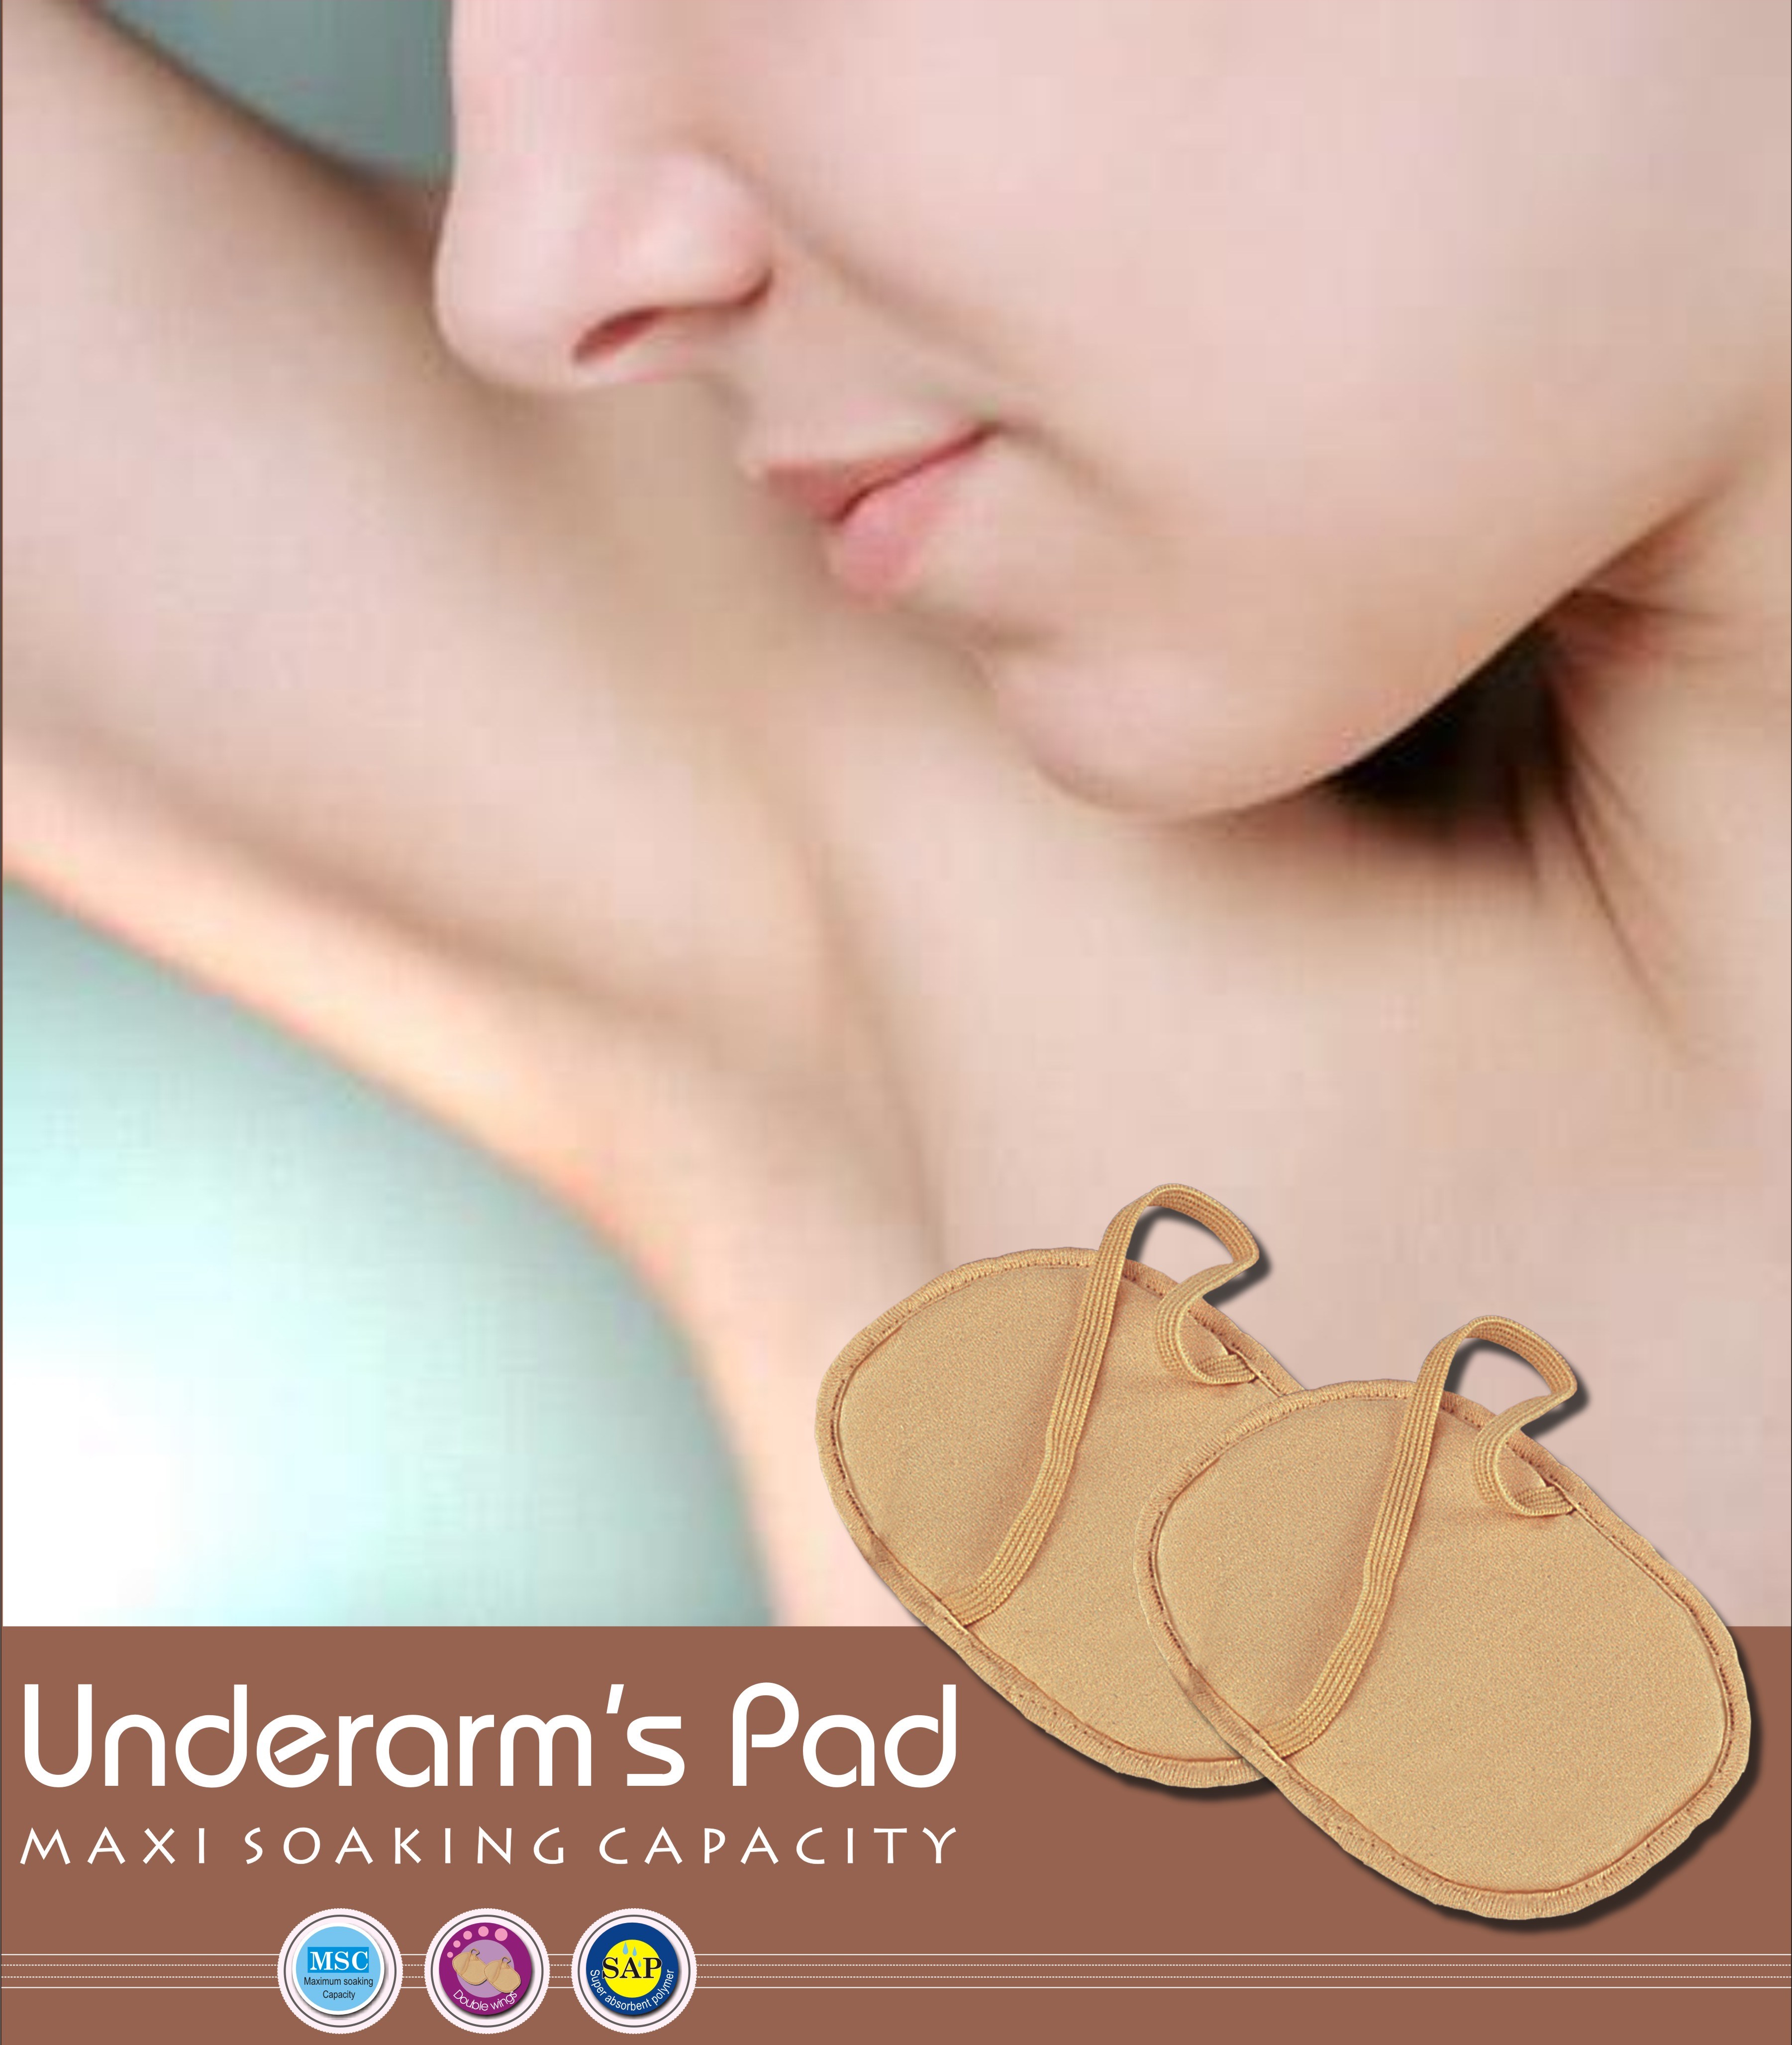 Reusable under arms pad 1 pair pack of 4